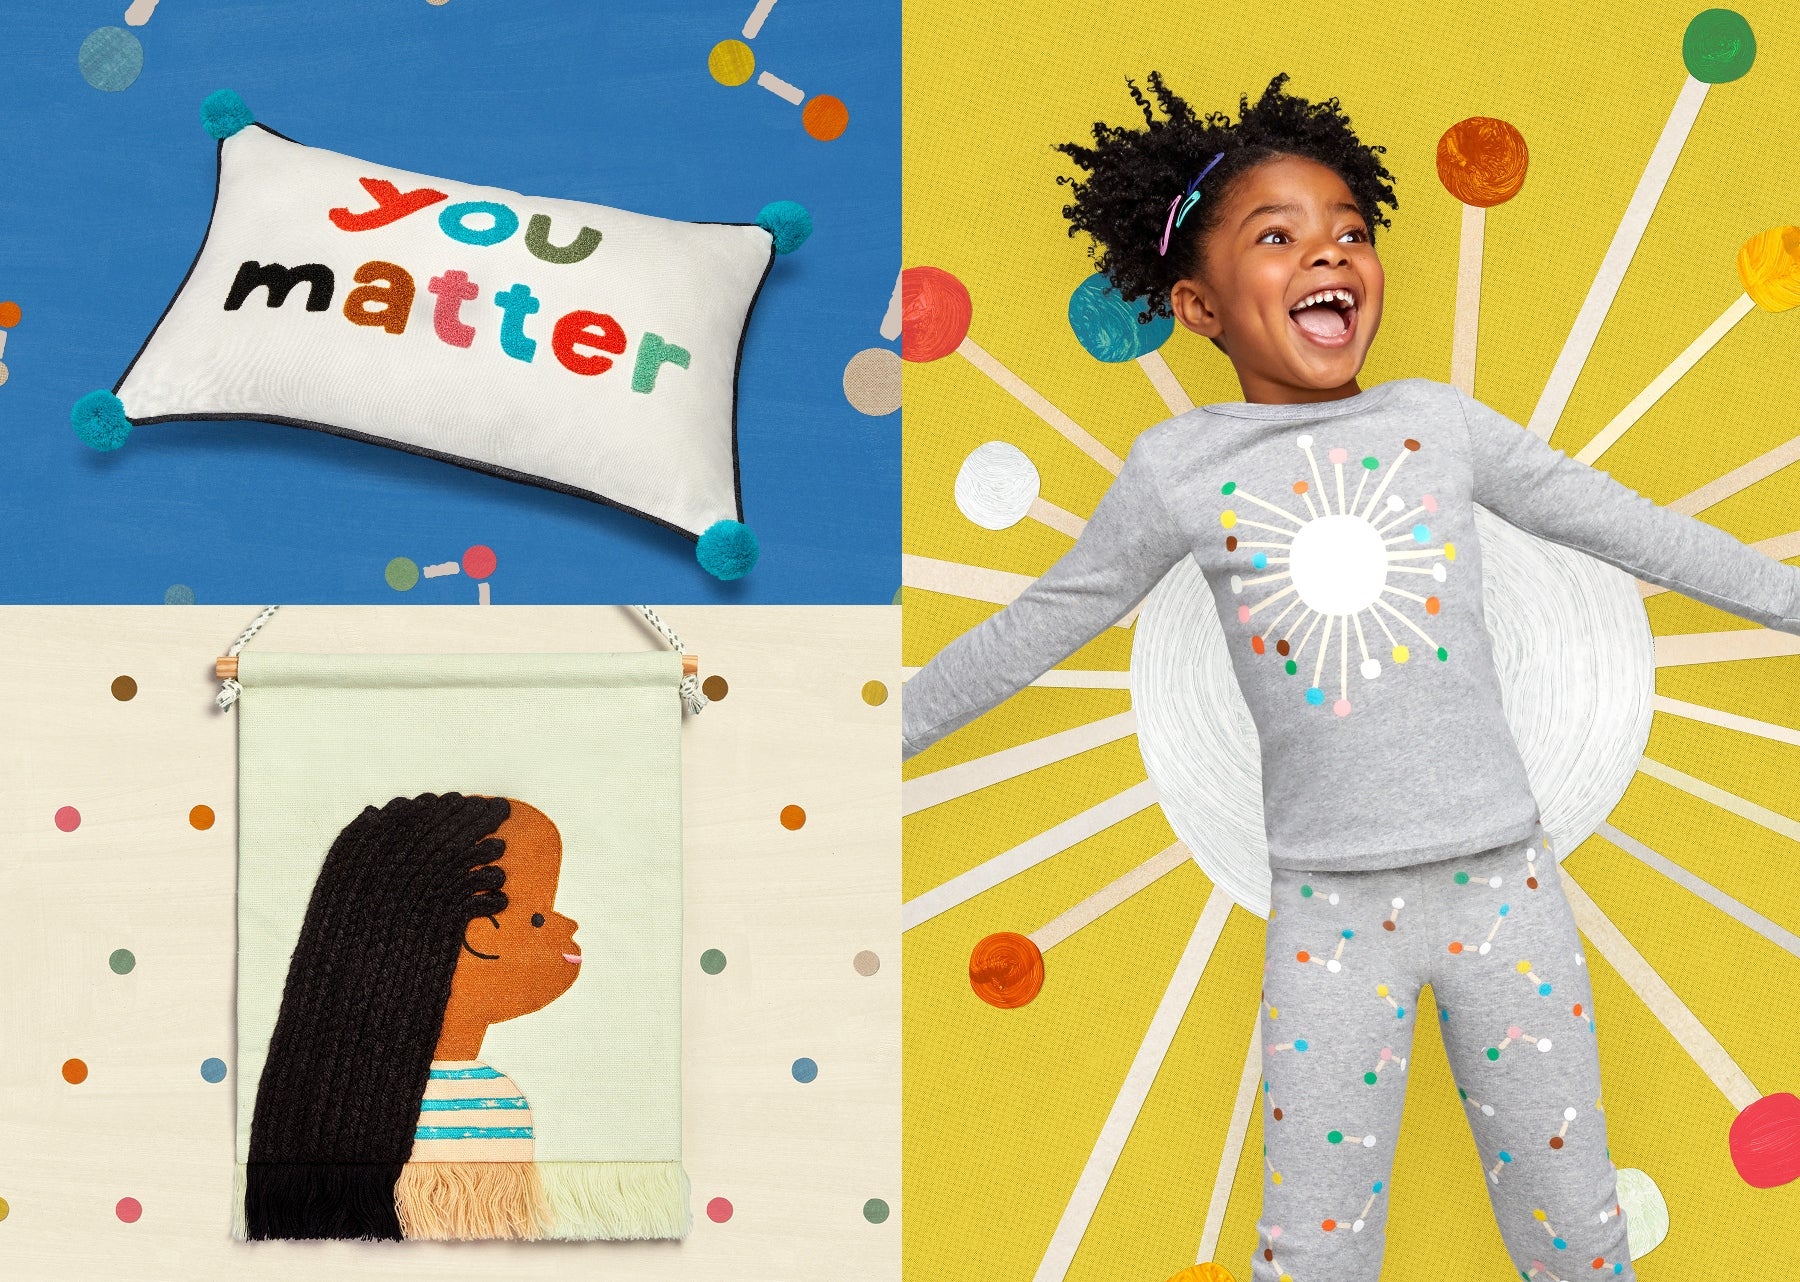 First Look: Illustrator Christian Robinson Brings His Imaginative Drawings To Target For Back-To-School Season